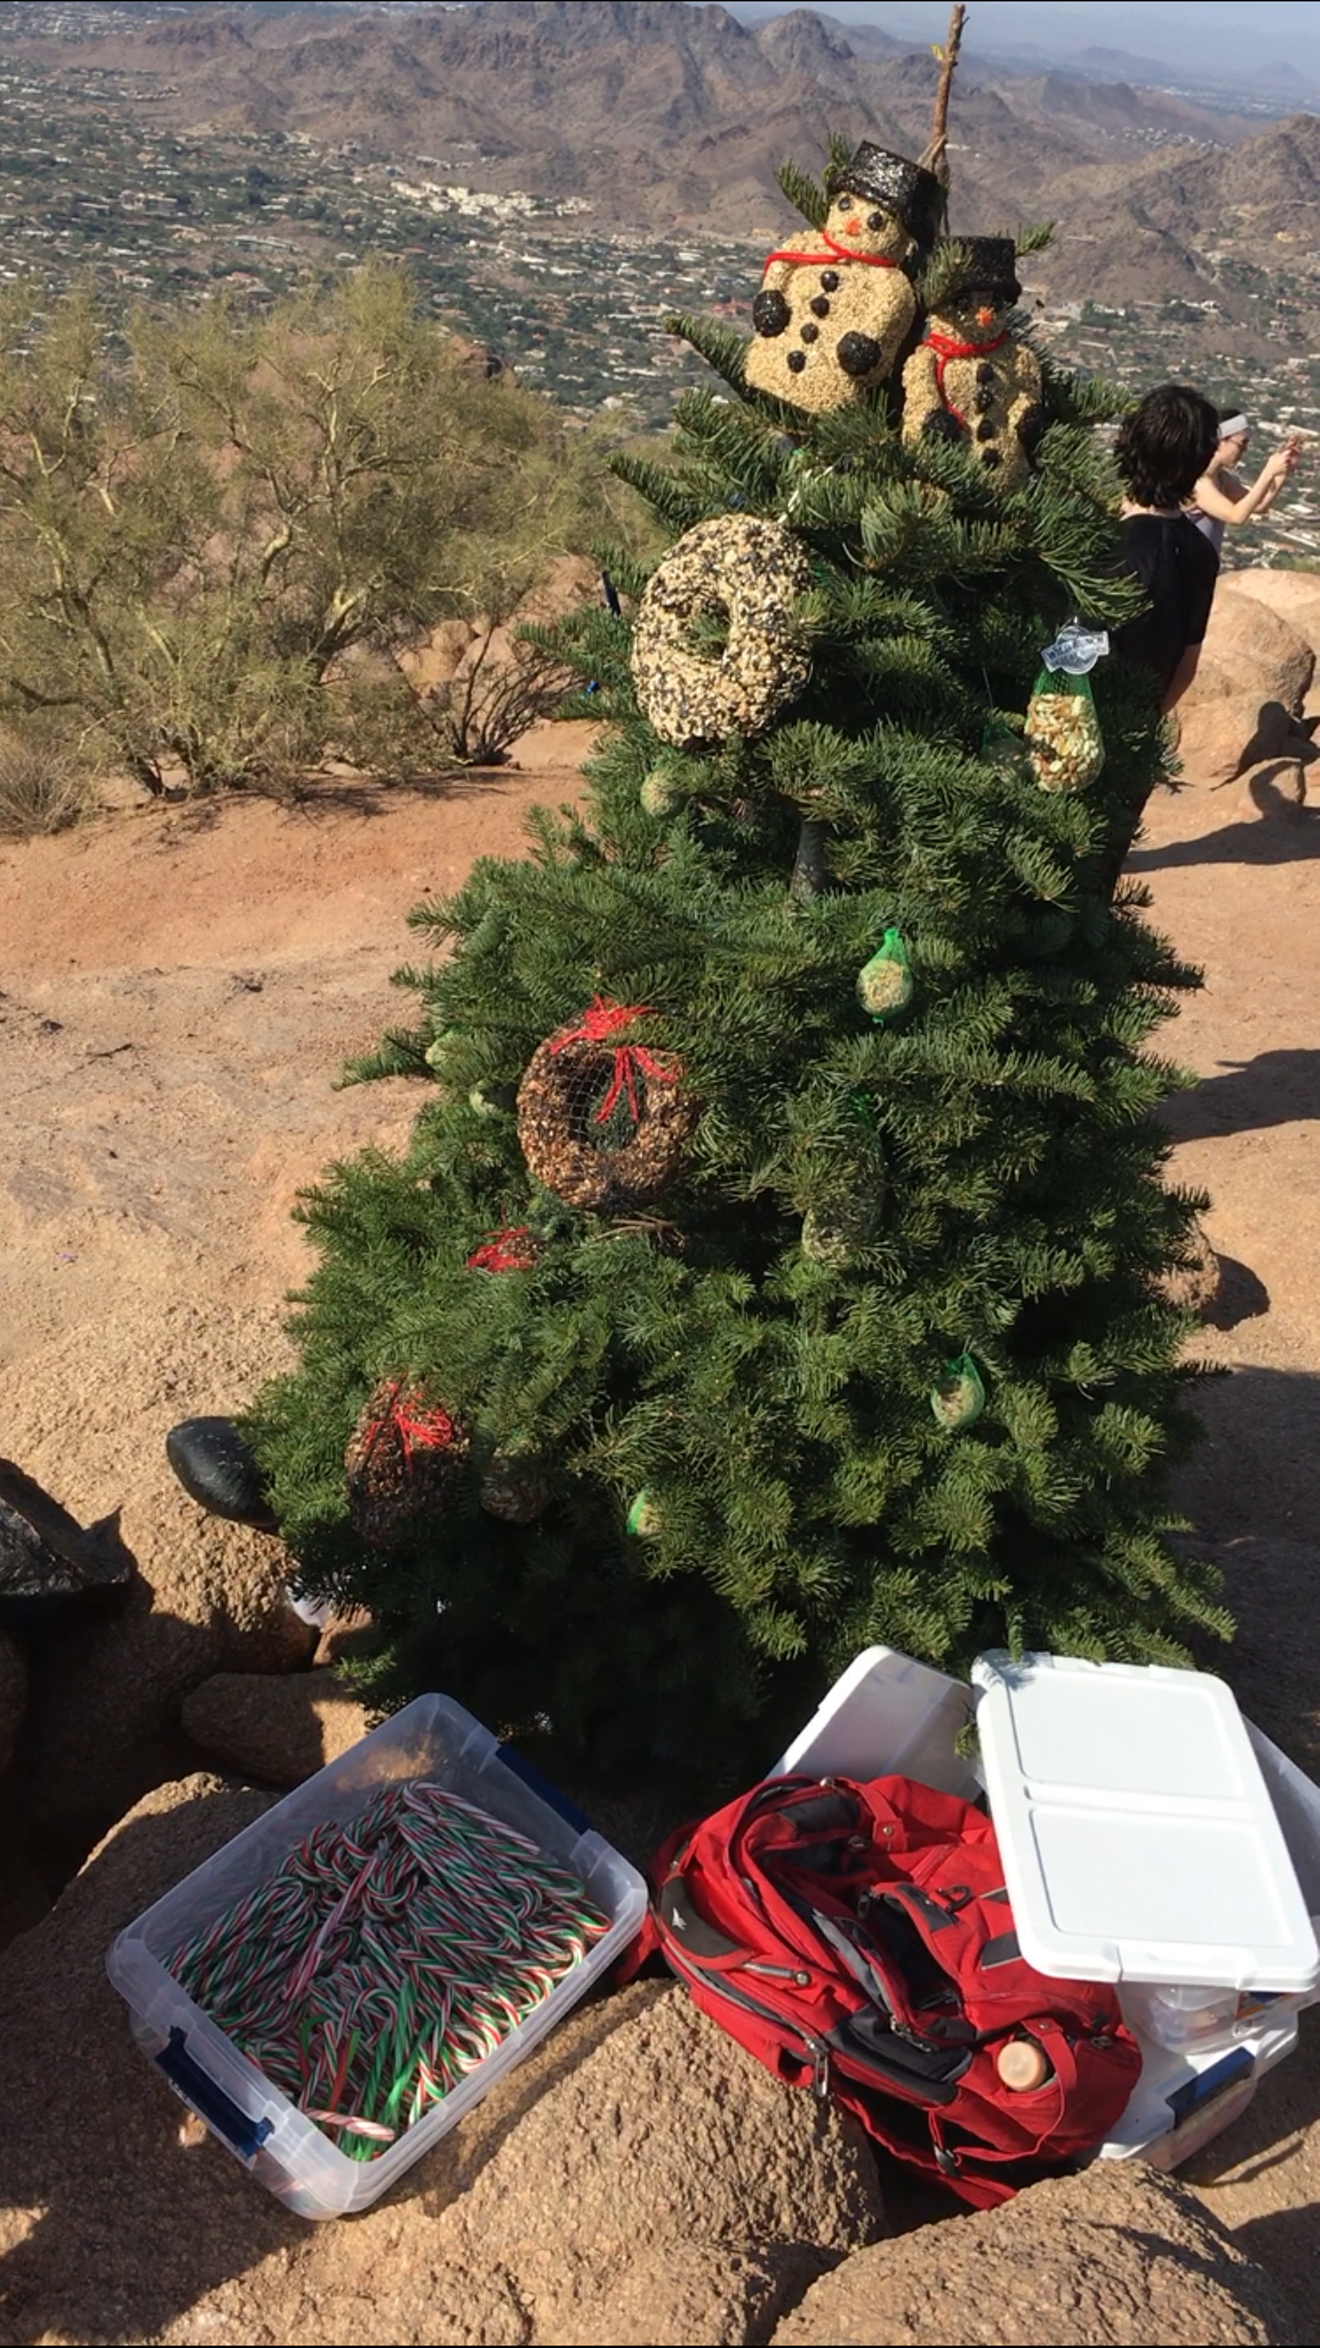 Phoenix policy prohibits mountain-park users to leave anything in the parks, including Christmas trees.